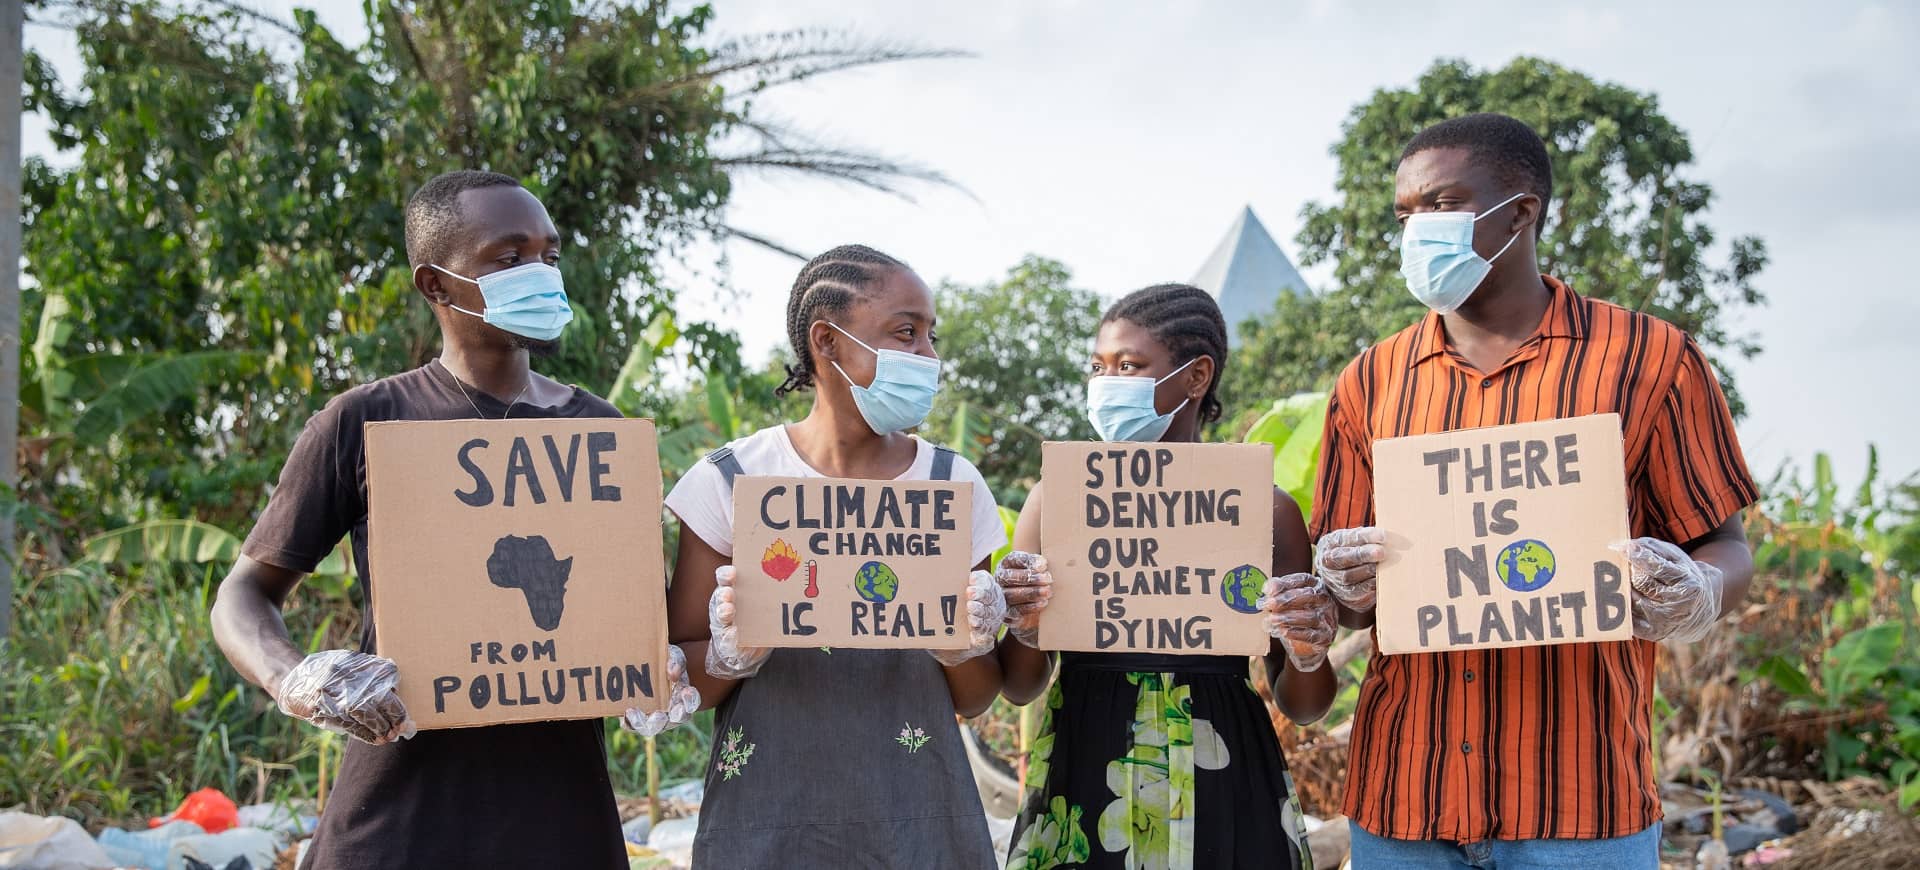 A group of people holding signs about climate change